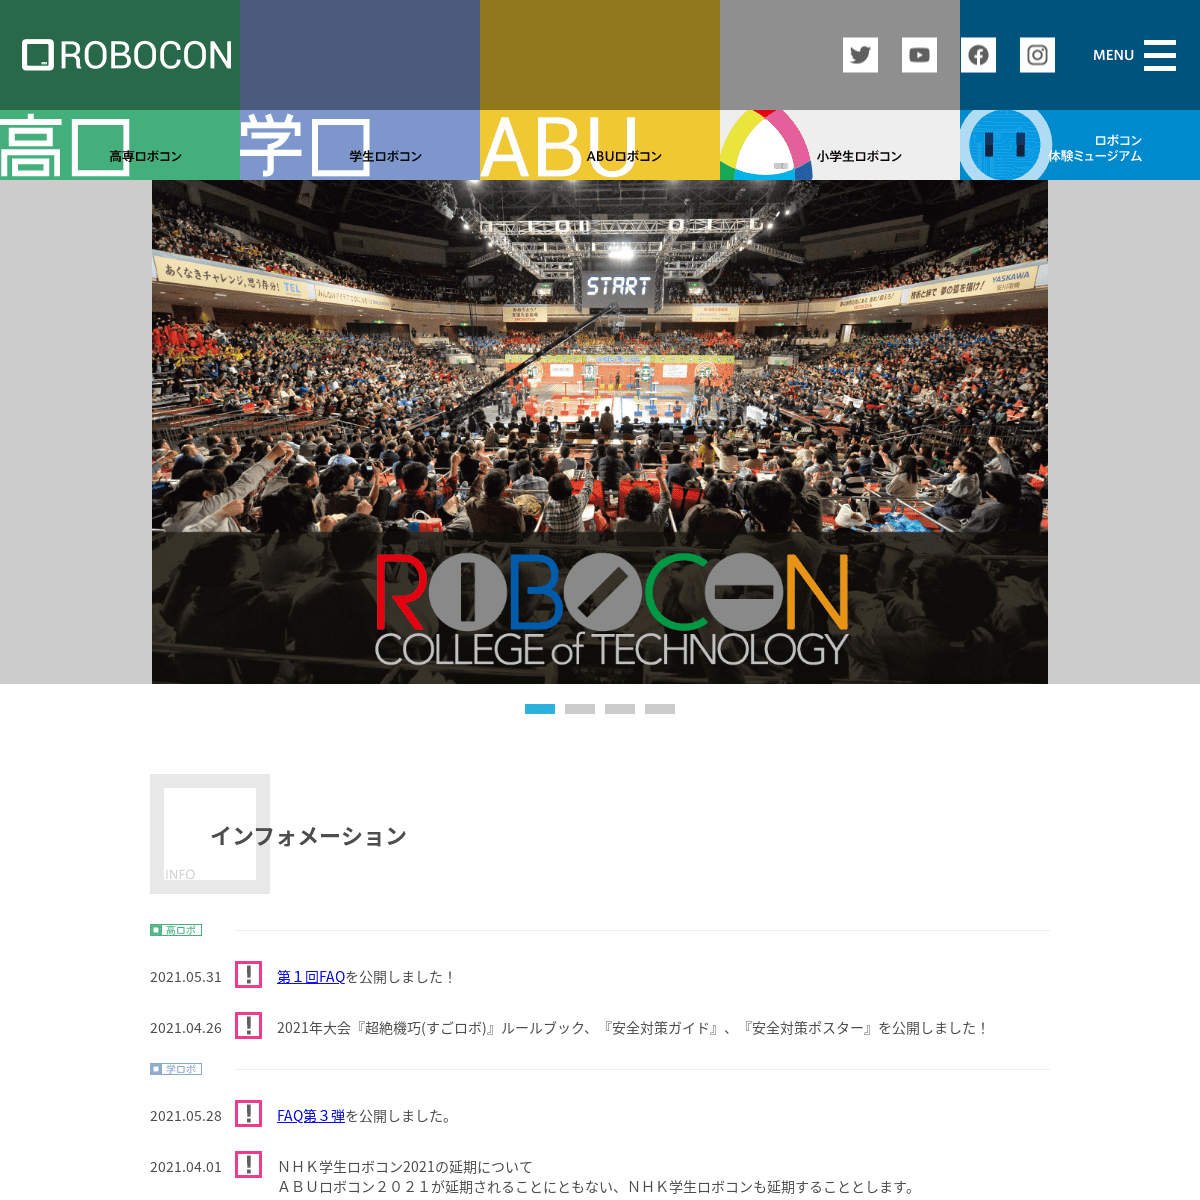 A complete backup of https://official-robocon.com